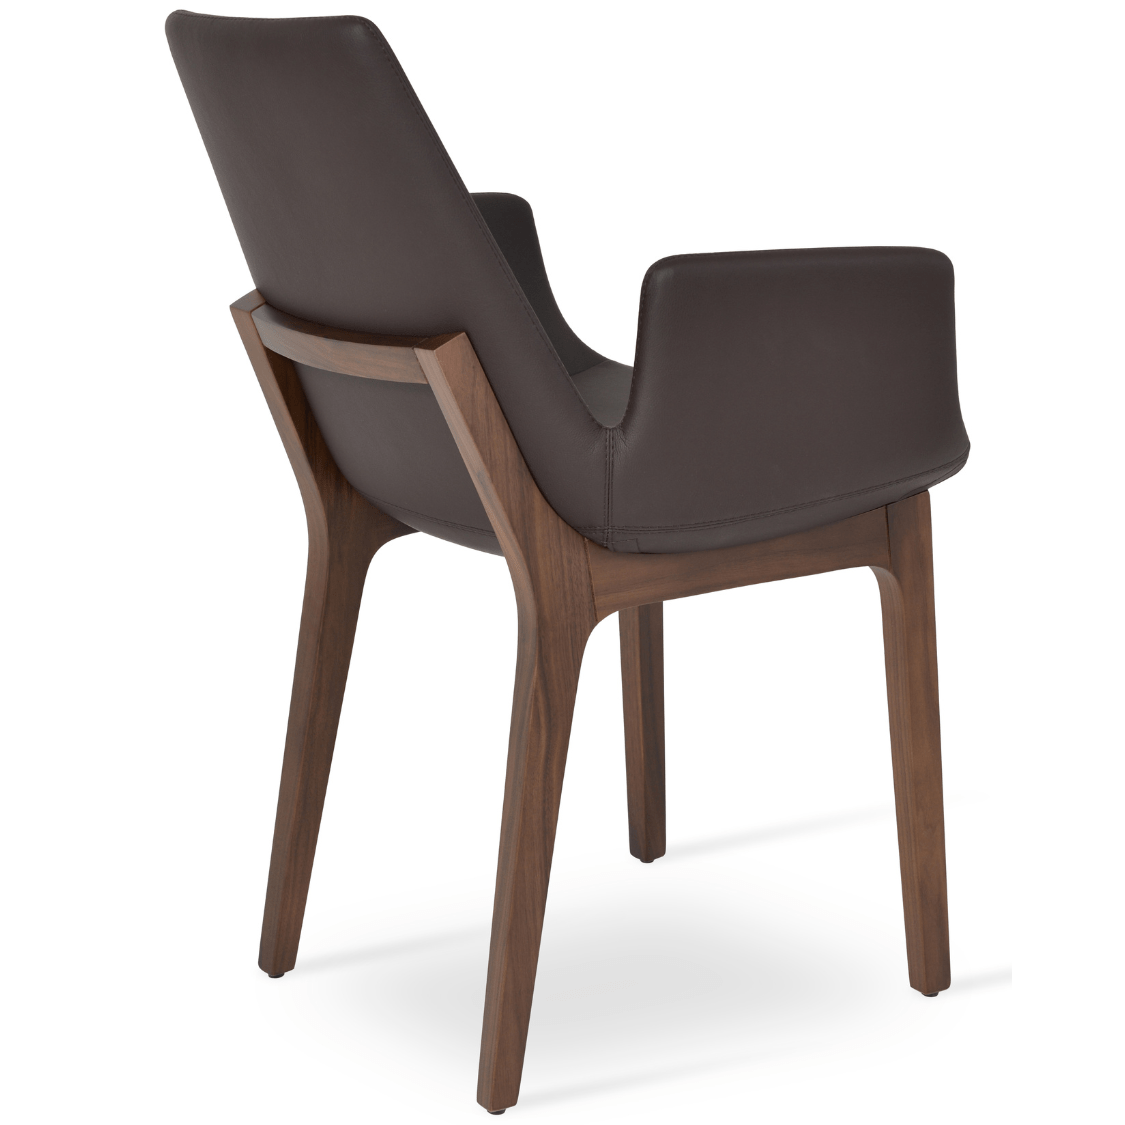 Leather Dining Chairs Eiffel Arm Brown - Your Bar Stools Canada